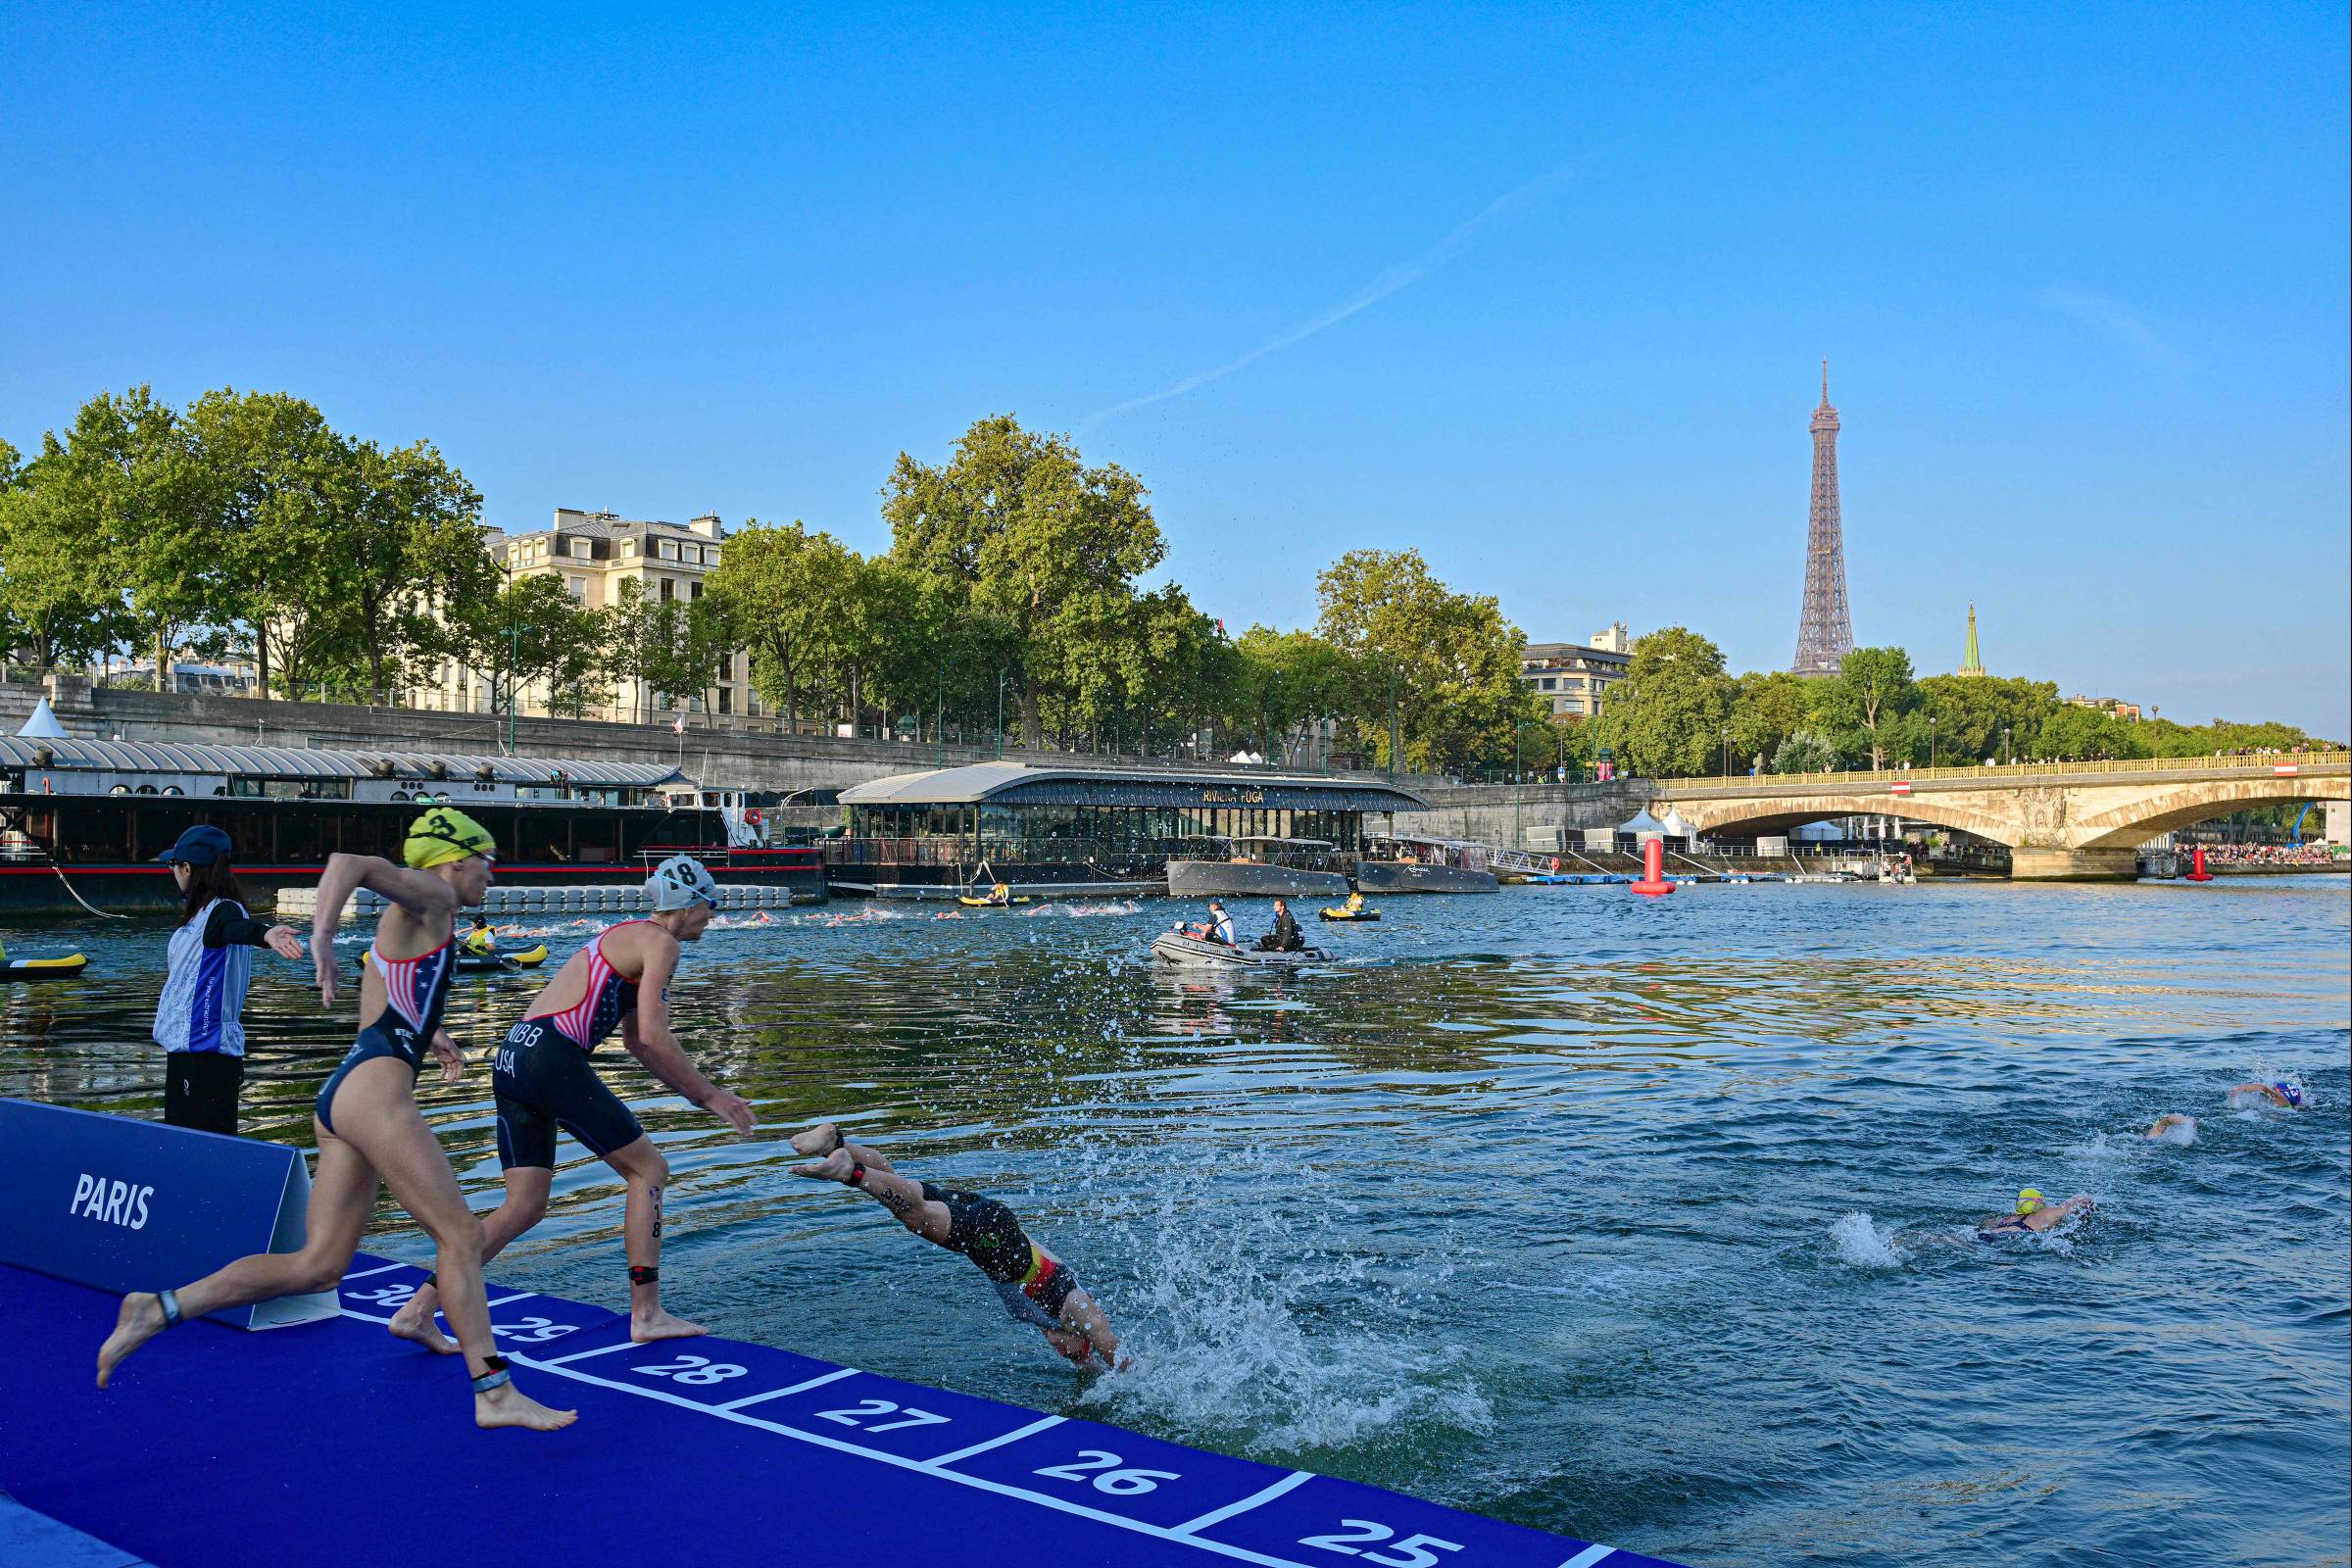 Triathlon athletes swim in the unpolluted Seine River in a test event for the 2024 Olympics